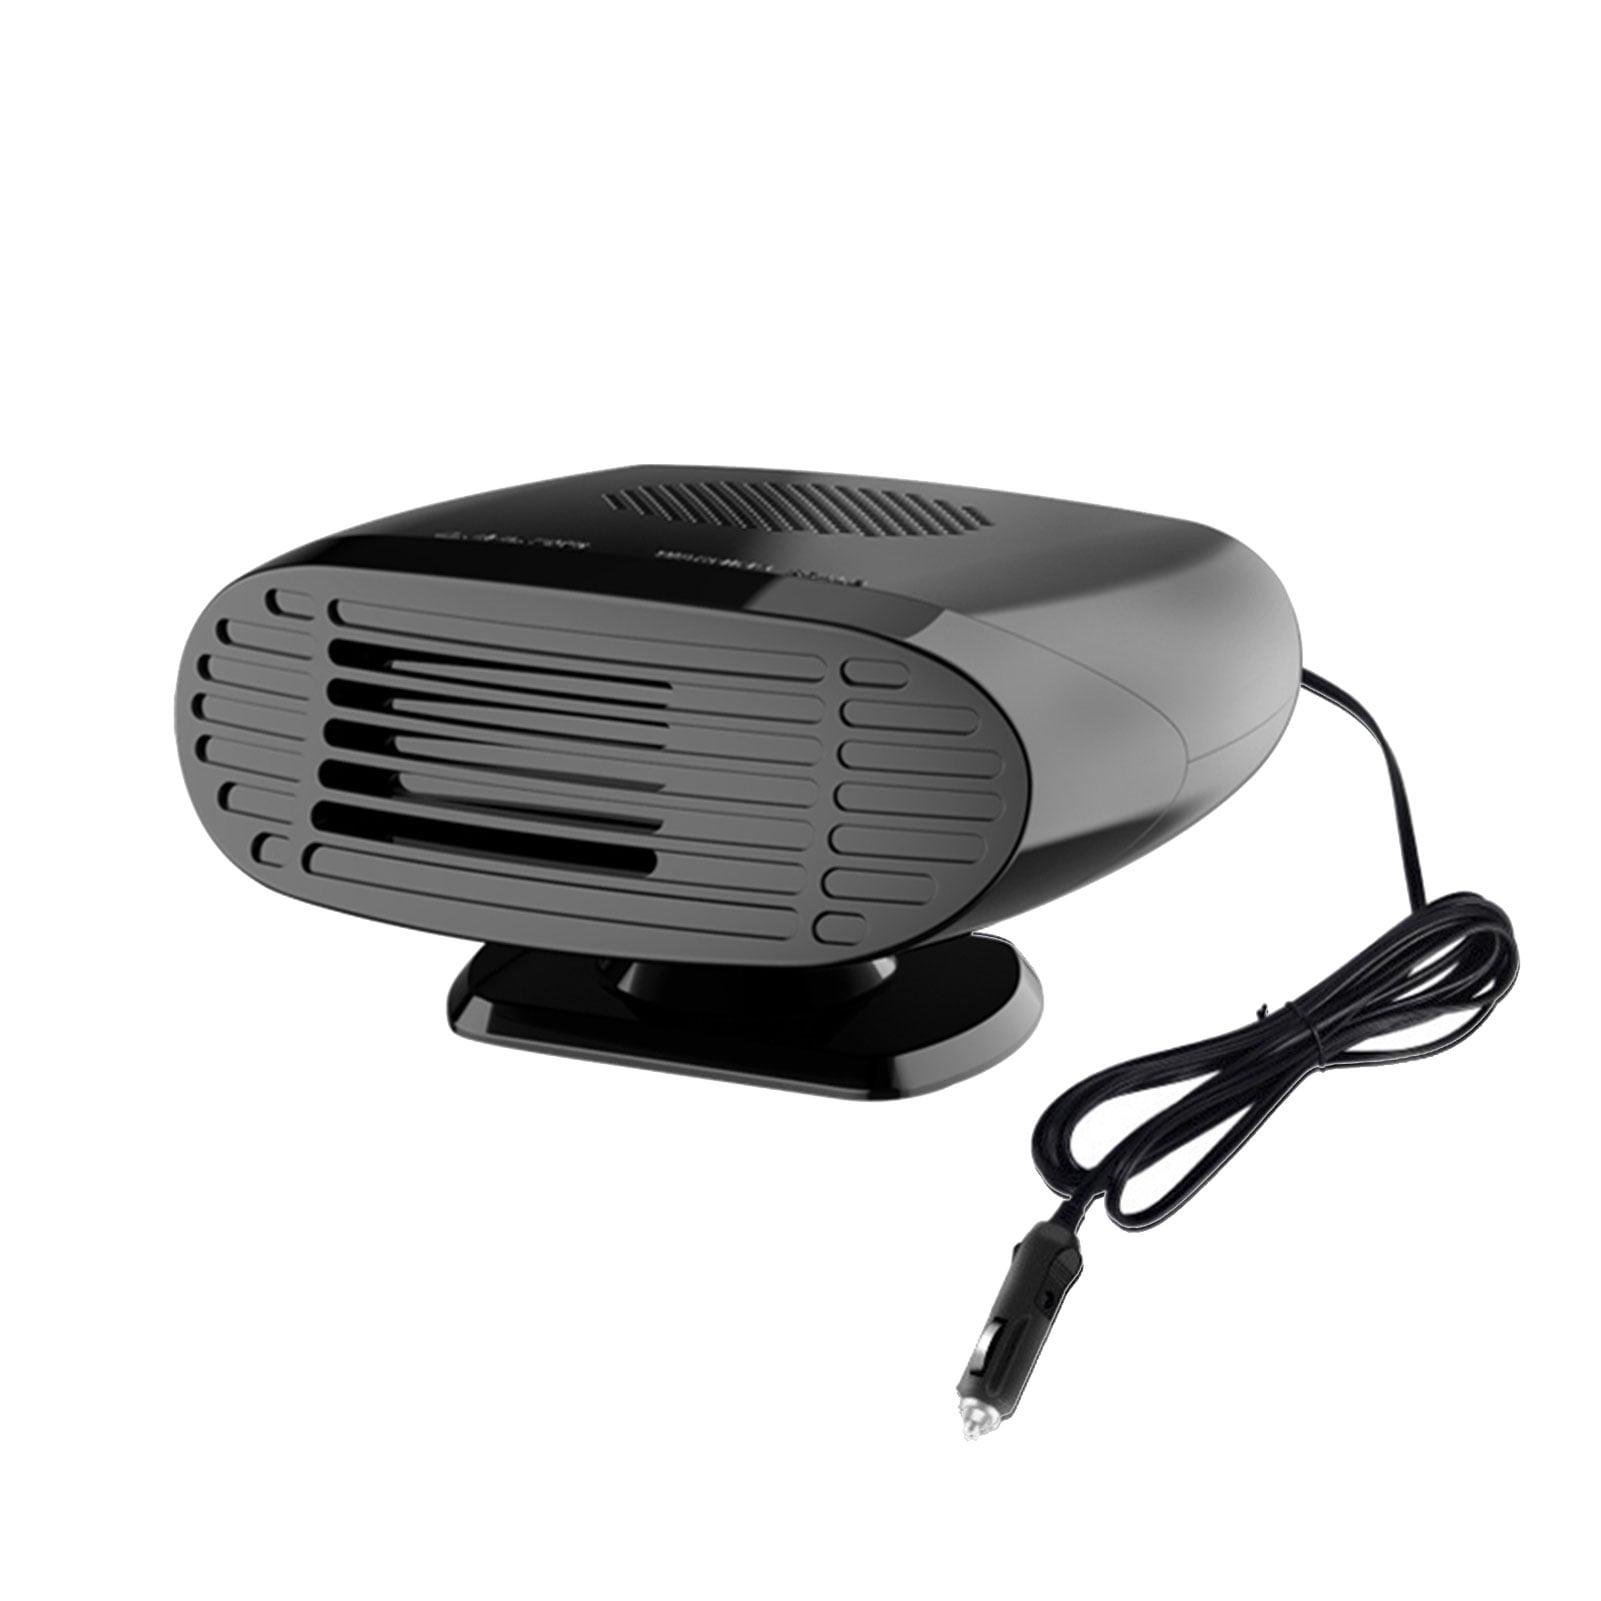 leking-car-heater-two-in-one-function-high-efficiency-electric-heater